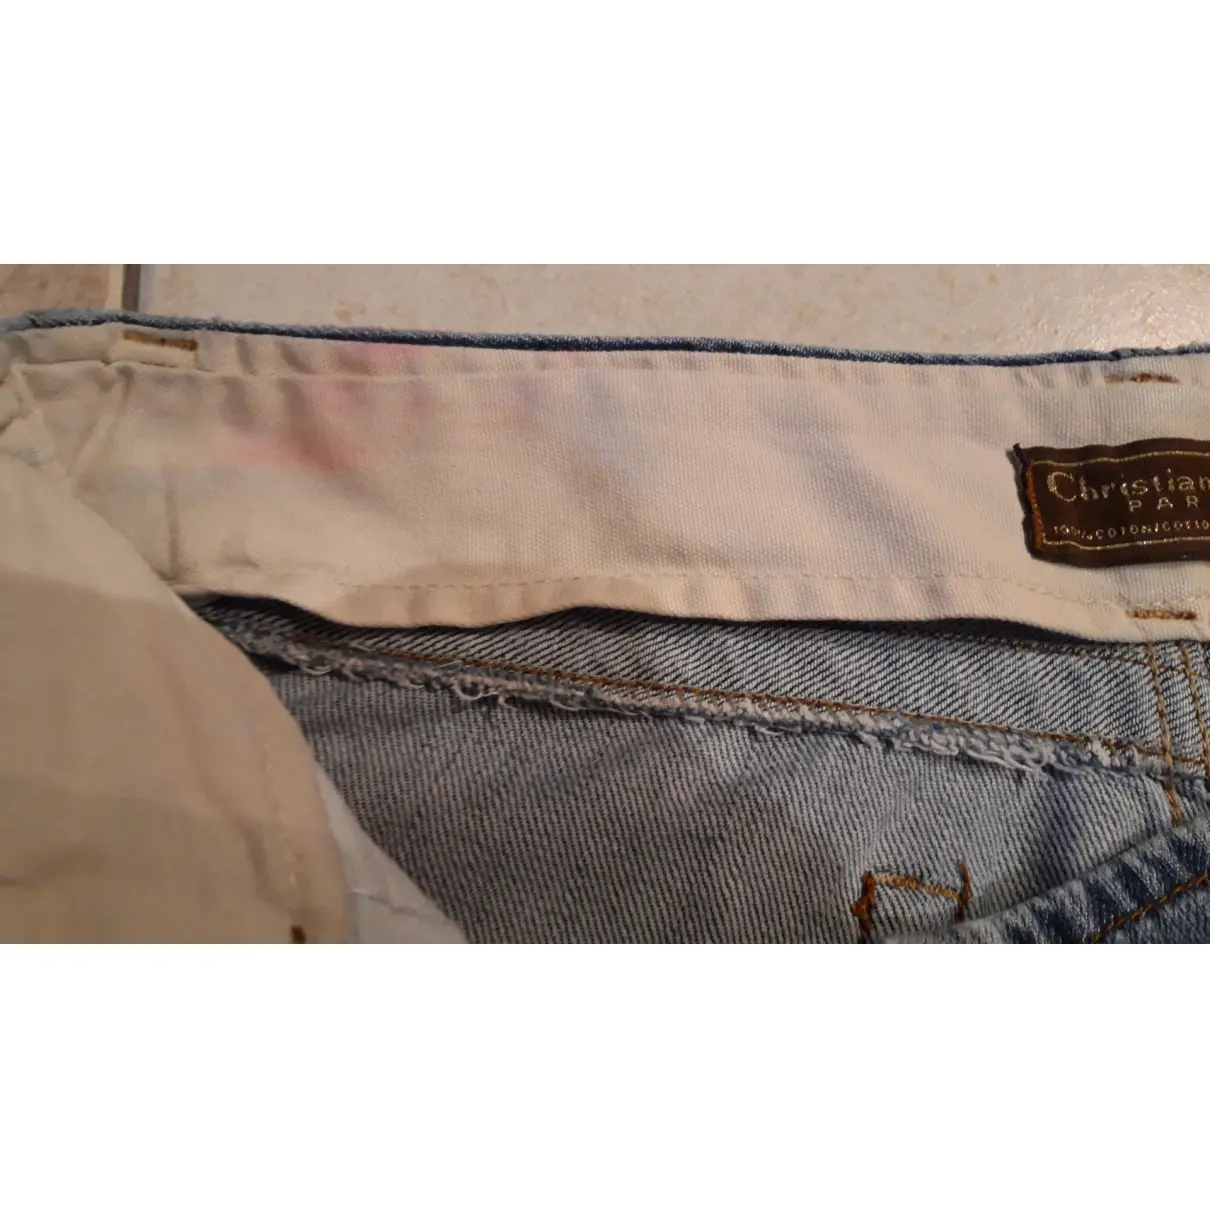 Buy Dior Straight jeans online